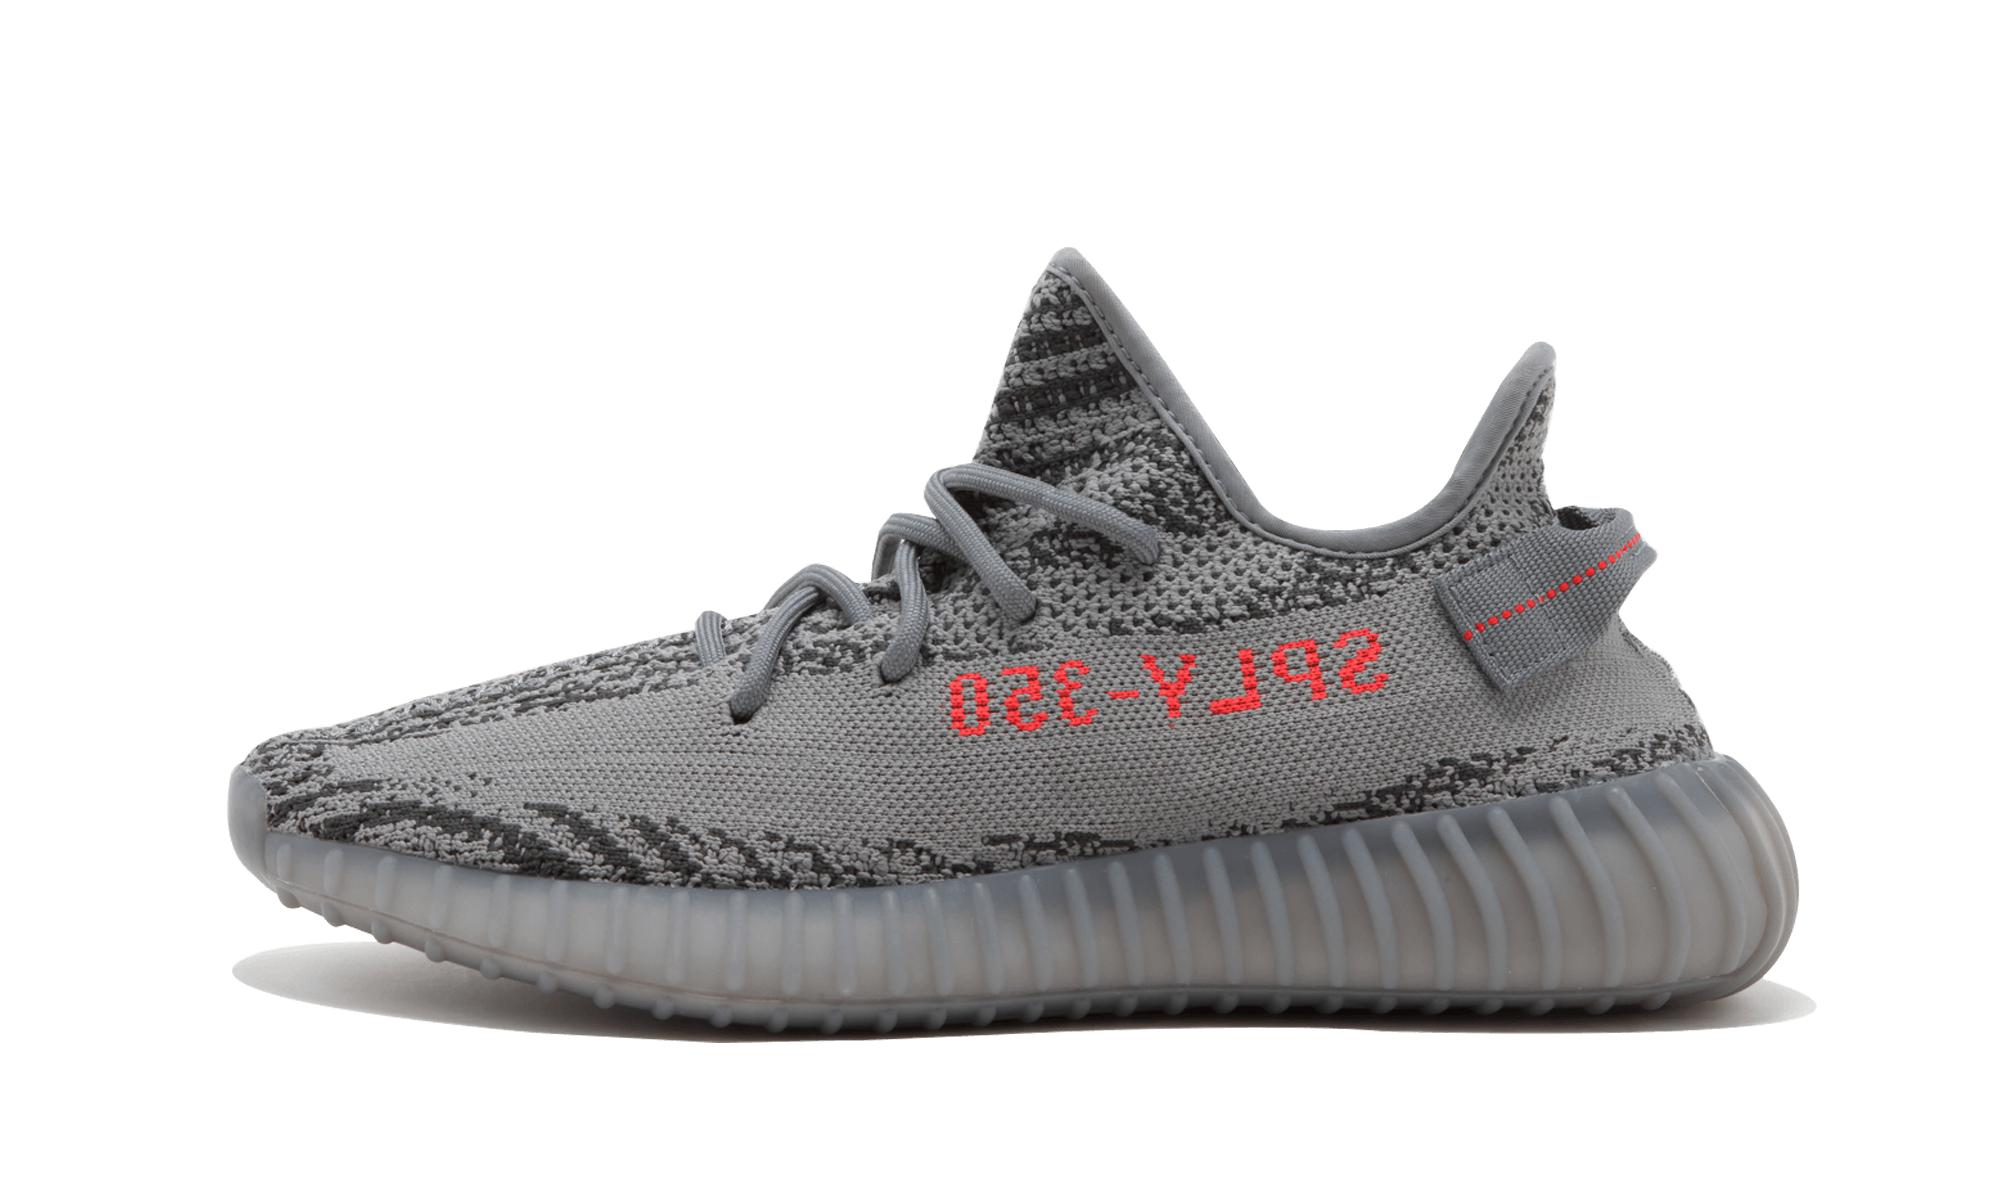 adidas YEEZY Boost 350 V2 “Carbon” - HIGHER